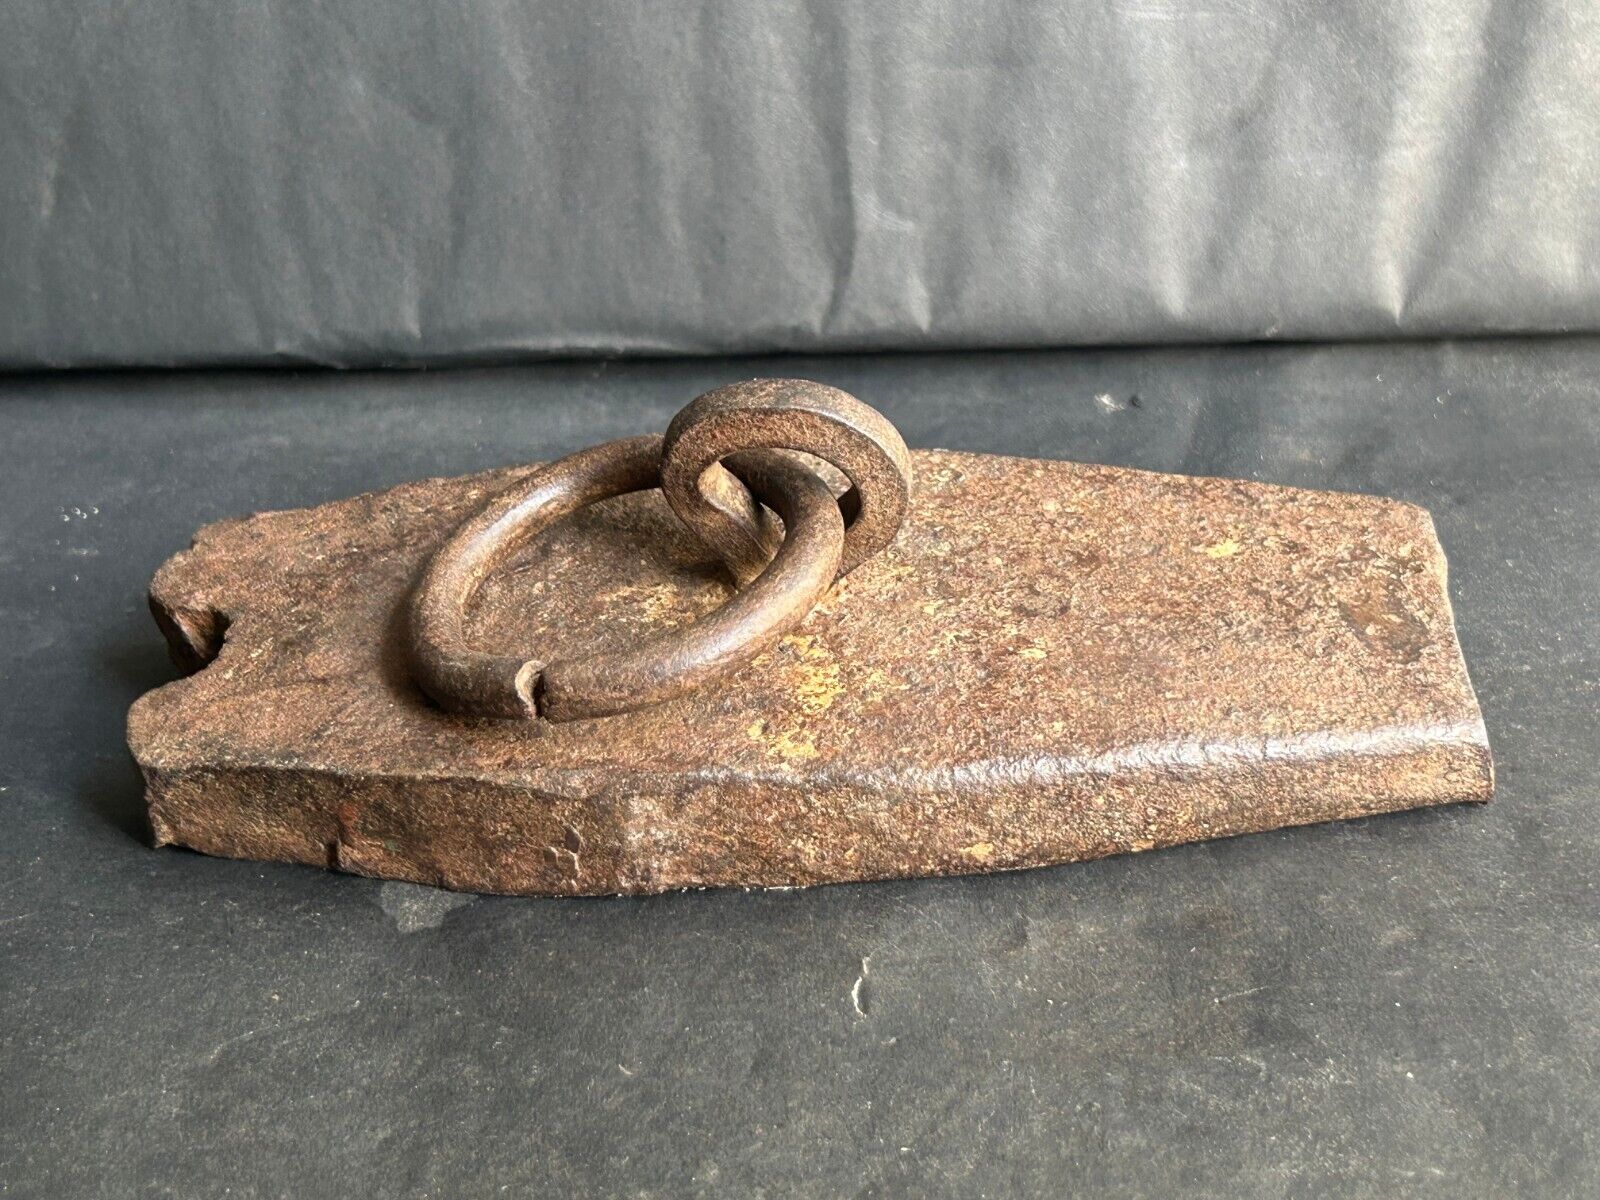 19c OLD HAND FORGED IRON HEAVY MERCANTILE MEASURING FISH SHAPE WEIGHT &HANDLE